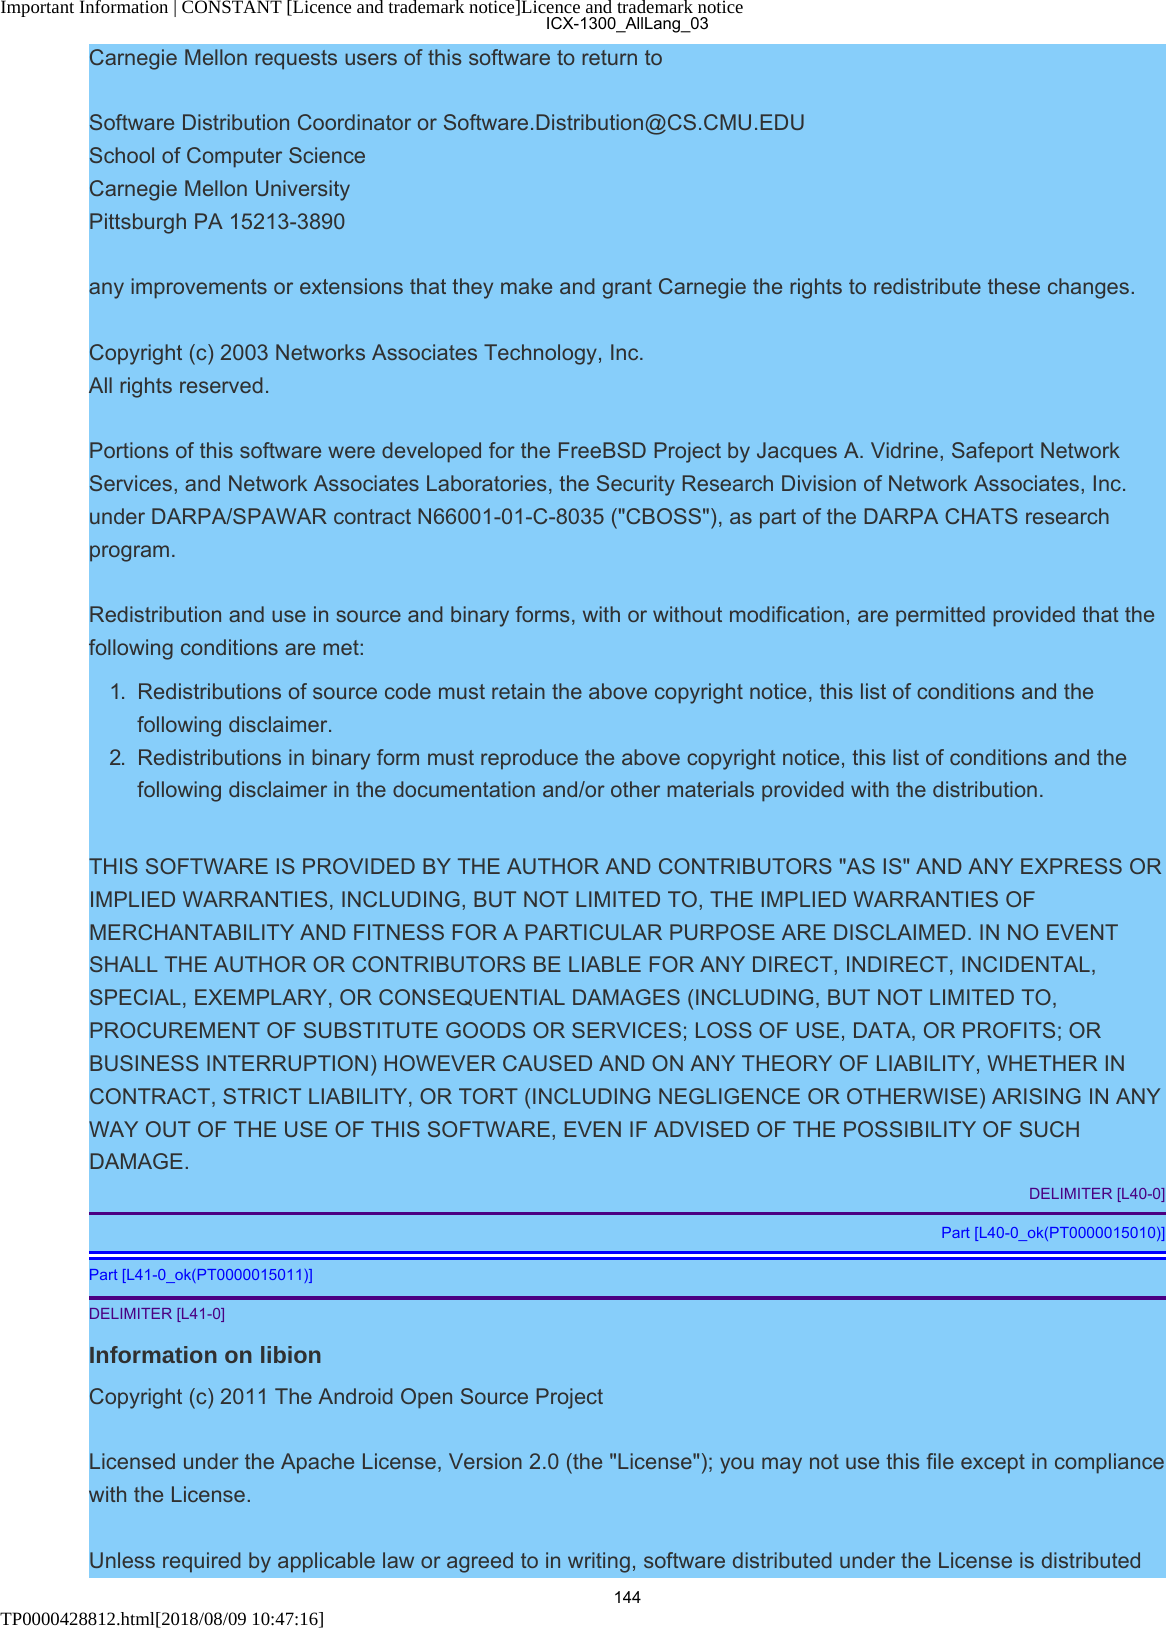 Important Information | CONSTANT [Licence and trademark notice]Licence and trademark noticeTP0000428812.html[2018/08/09 10:47:16]Carnegie Mellon requests users of this software to return toSoftware Distribution Coordinator or Software.Distribution@CS.CMU.EDUSchool of Computer ScienceCarnegie Mellon UniversityPittsburgh PA 15213-3890any improvements or extensions that they make and grant Carnegie the rights to redistribute these changes.Copyright (c) 2003 Networks Associates Technology, Inc.All rights reserved.Portions of this software were developed for the FreeBSD Project by Jacques A. Vidrine, Safeport NetworkServices, and Network Associates Laboratories, the Security Research Division of Network Associates, Inc.under DARPA/SPAWAR contract N66001-01-C-8035 (&quot;CBOSS&quot;), as part of the DARPA CHATS researchprogram.Redistribution and use in source and binary forms, with or without modification, are permitted provided that thefollowing conditions are met:1.  Redistributions of source code must retain the above copyright notice, this list of conditions and thefollowing disclaimer.2.  Redistributions in binary form must reproduce the above copyright notice, this list of conditions and thefollowing disclaimer in the documentation and/or other materials provided with the distribution.THIS SOFTWARE IS PROVIDED BY THE AUTHOR AND CONTRIBUTORS &quot;AS IS&quot; AND ANY EXPRESS ORIMPLIED WARRANTIES, INCLUDING, BUT NOT LIMITED TO, THE IMPLIED WARRANTIES OFMERCHANTABILITY AND FITNESS FOR A PARTICULAR PURPOSE ARE DISCLAIMED. IN NO EVENTSHALL THE AUTHOR OR CONTRIBUTORS BE LIABLE FOR ANY DIRECT, INDIRECT, INCIDENTAL,SPECIAL, EXEMPLARY, OR CONSEQUENTIAL DAMAGES (INCLUDING, BUT NOT LIMITED TO,PROCUREMENT OF SUBSTITUTE GOODS OR SERVICES; LOSS OF USE, DATA, OR PROFITS; ORBUSINESS INTERRUPTION) HOWEVER CAUSED AND ON ANY THEORY OF LIABILITY, WHETHER INCONTRACT, STRICT LIABILITY, OR TORT (INCLUDING NEGLIGENCE OR OTHERWISE) ARISING IN ANYWAY OUT OF THE USE OF THIS SOFTWARE, EVEN IF ADVISED OF THE POSSIBILITY OF SUCHDAMAGE.DELIMITER [L40-0]Part [L40-0_ok(PT0000015010)]Part [L41-0_ok(PT0000015011)]DELIMITER [L41-0]Information on libionCopyright (c) 2011 The Android Open Source ProjectLicensed under the Apache License, Version 2.0 (the &quot;License&quot;); you may not use this file except in compliancewith the License.Unless required by applicable law or agreed to in writing, software distributed under the License is distributedICX-1300_AllLang_03144